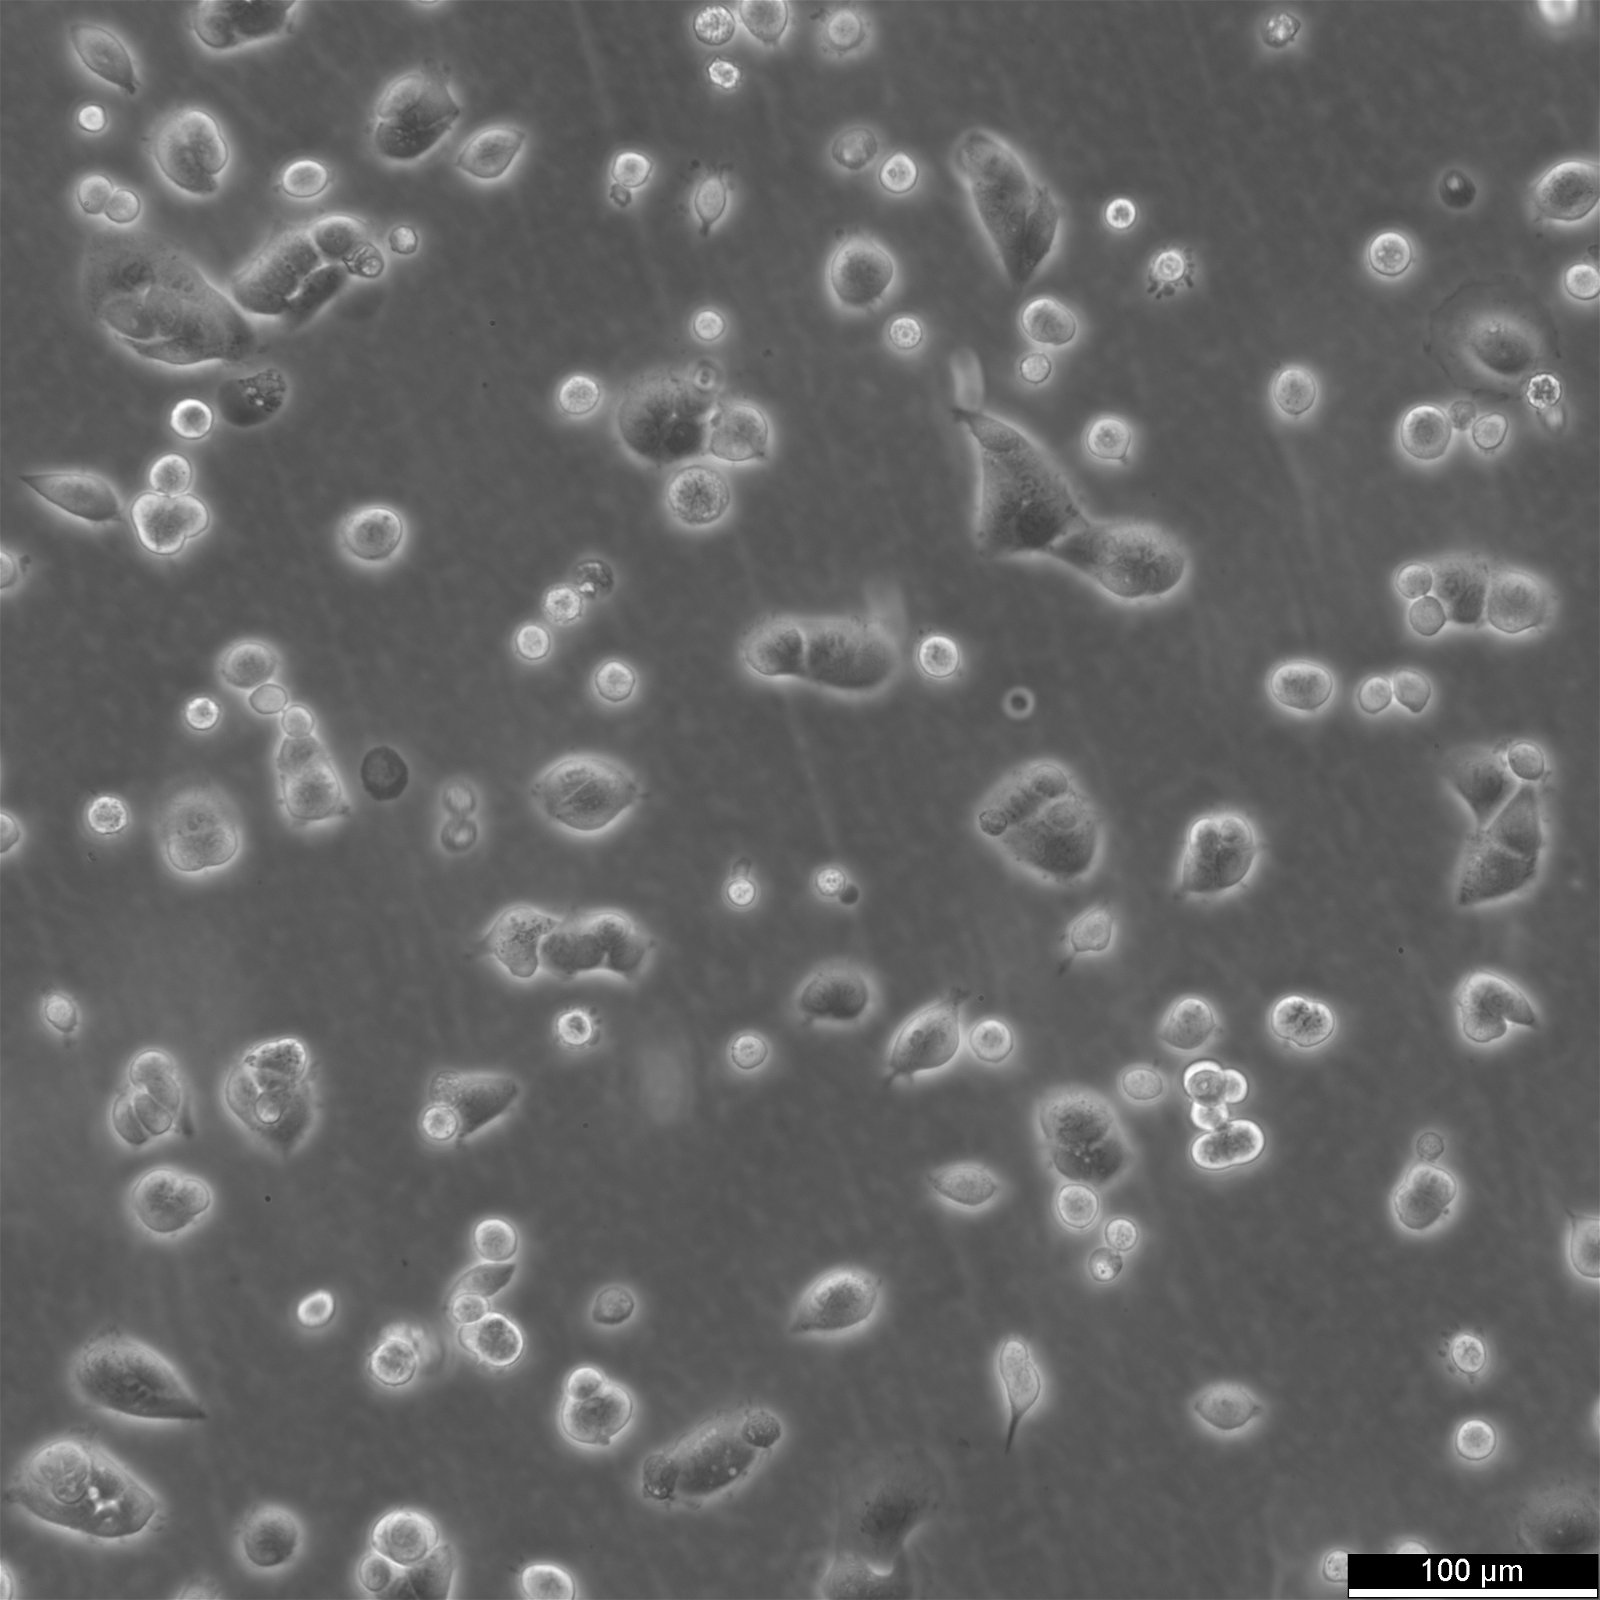 MKN-74 Cells